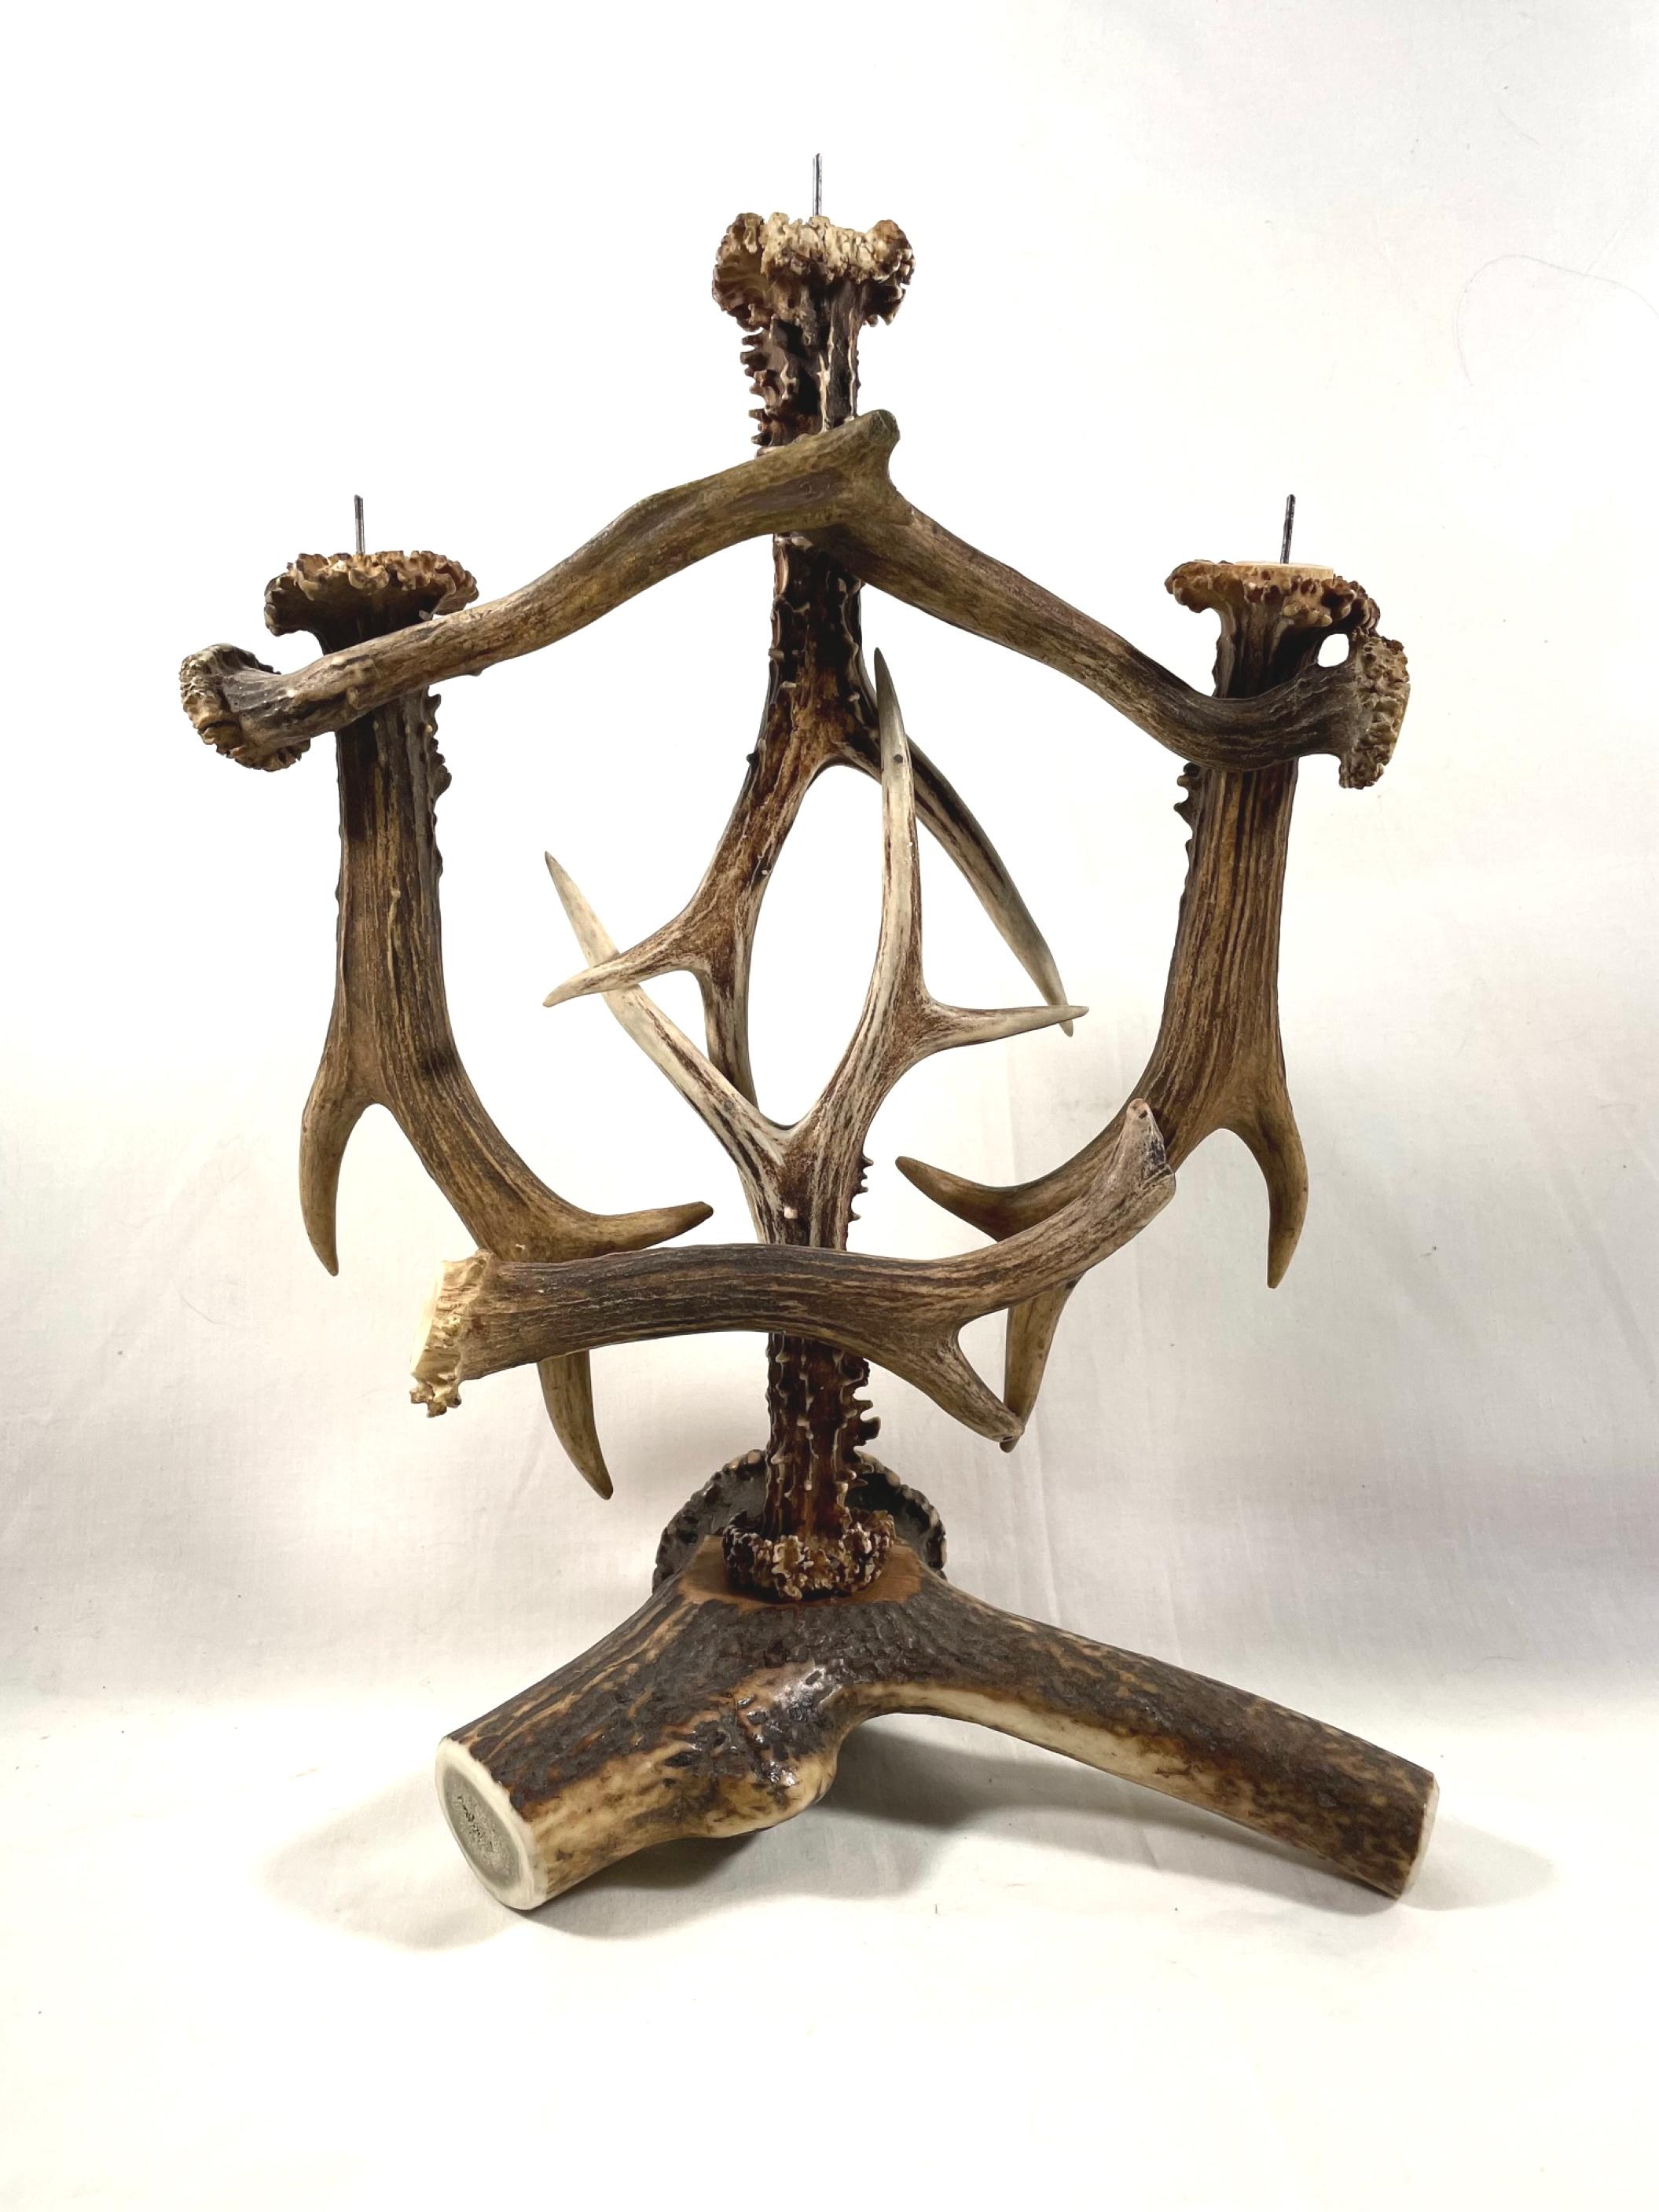 Antler candelabra, 3- armed with wood carved enzian flower medallion

This antique and one-of-a-kind candelabra candle holder is made of genuine deer antlers. Completely handmade and singularly designed, It holds 3 candles with metal prongs. A